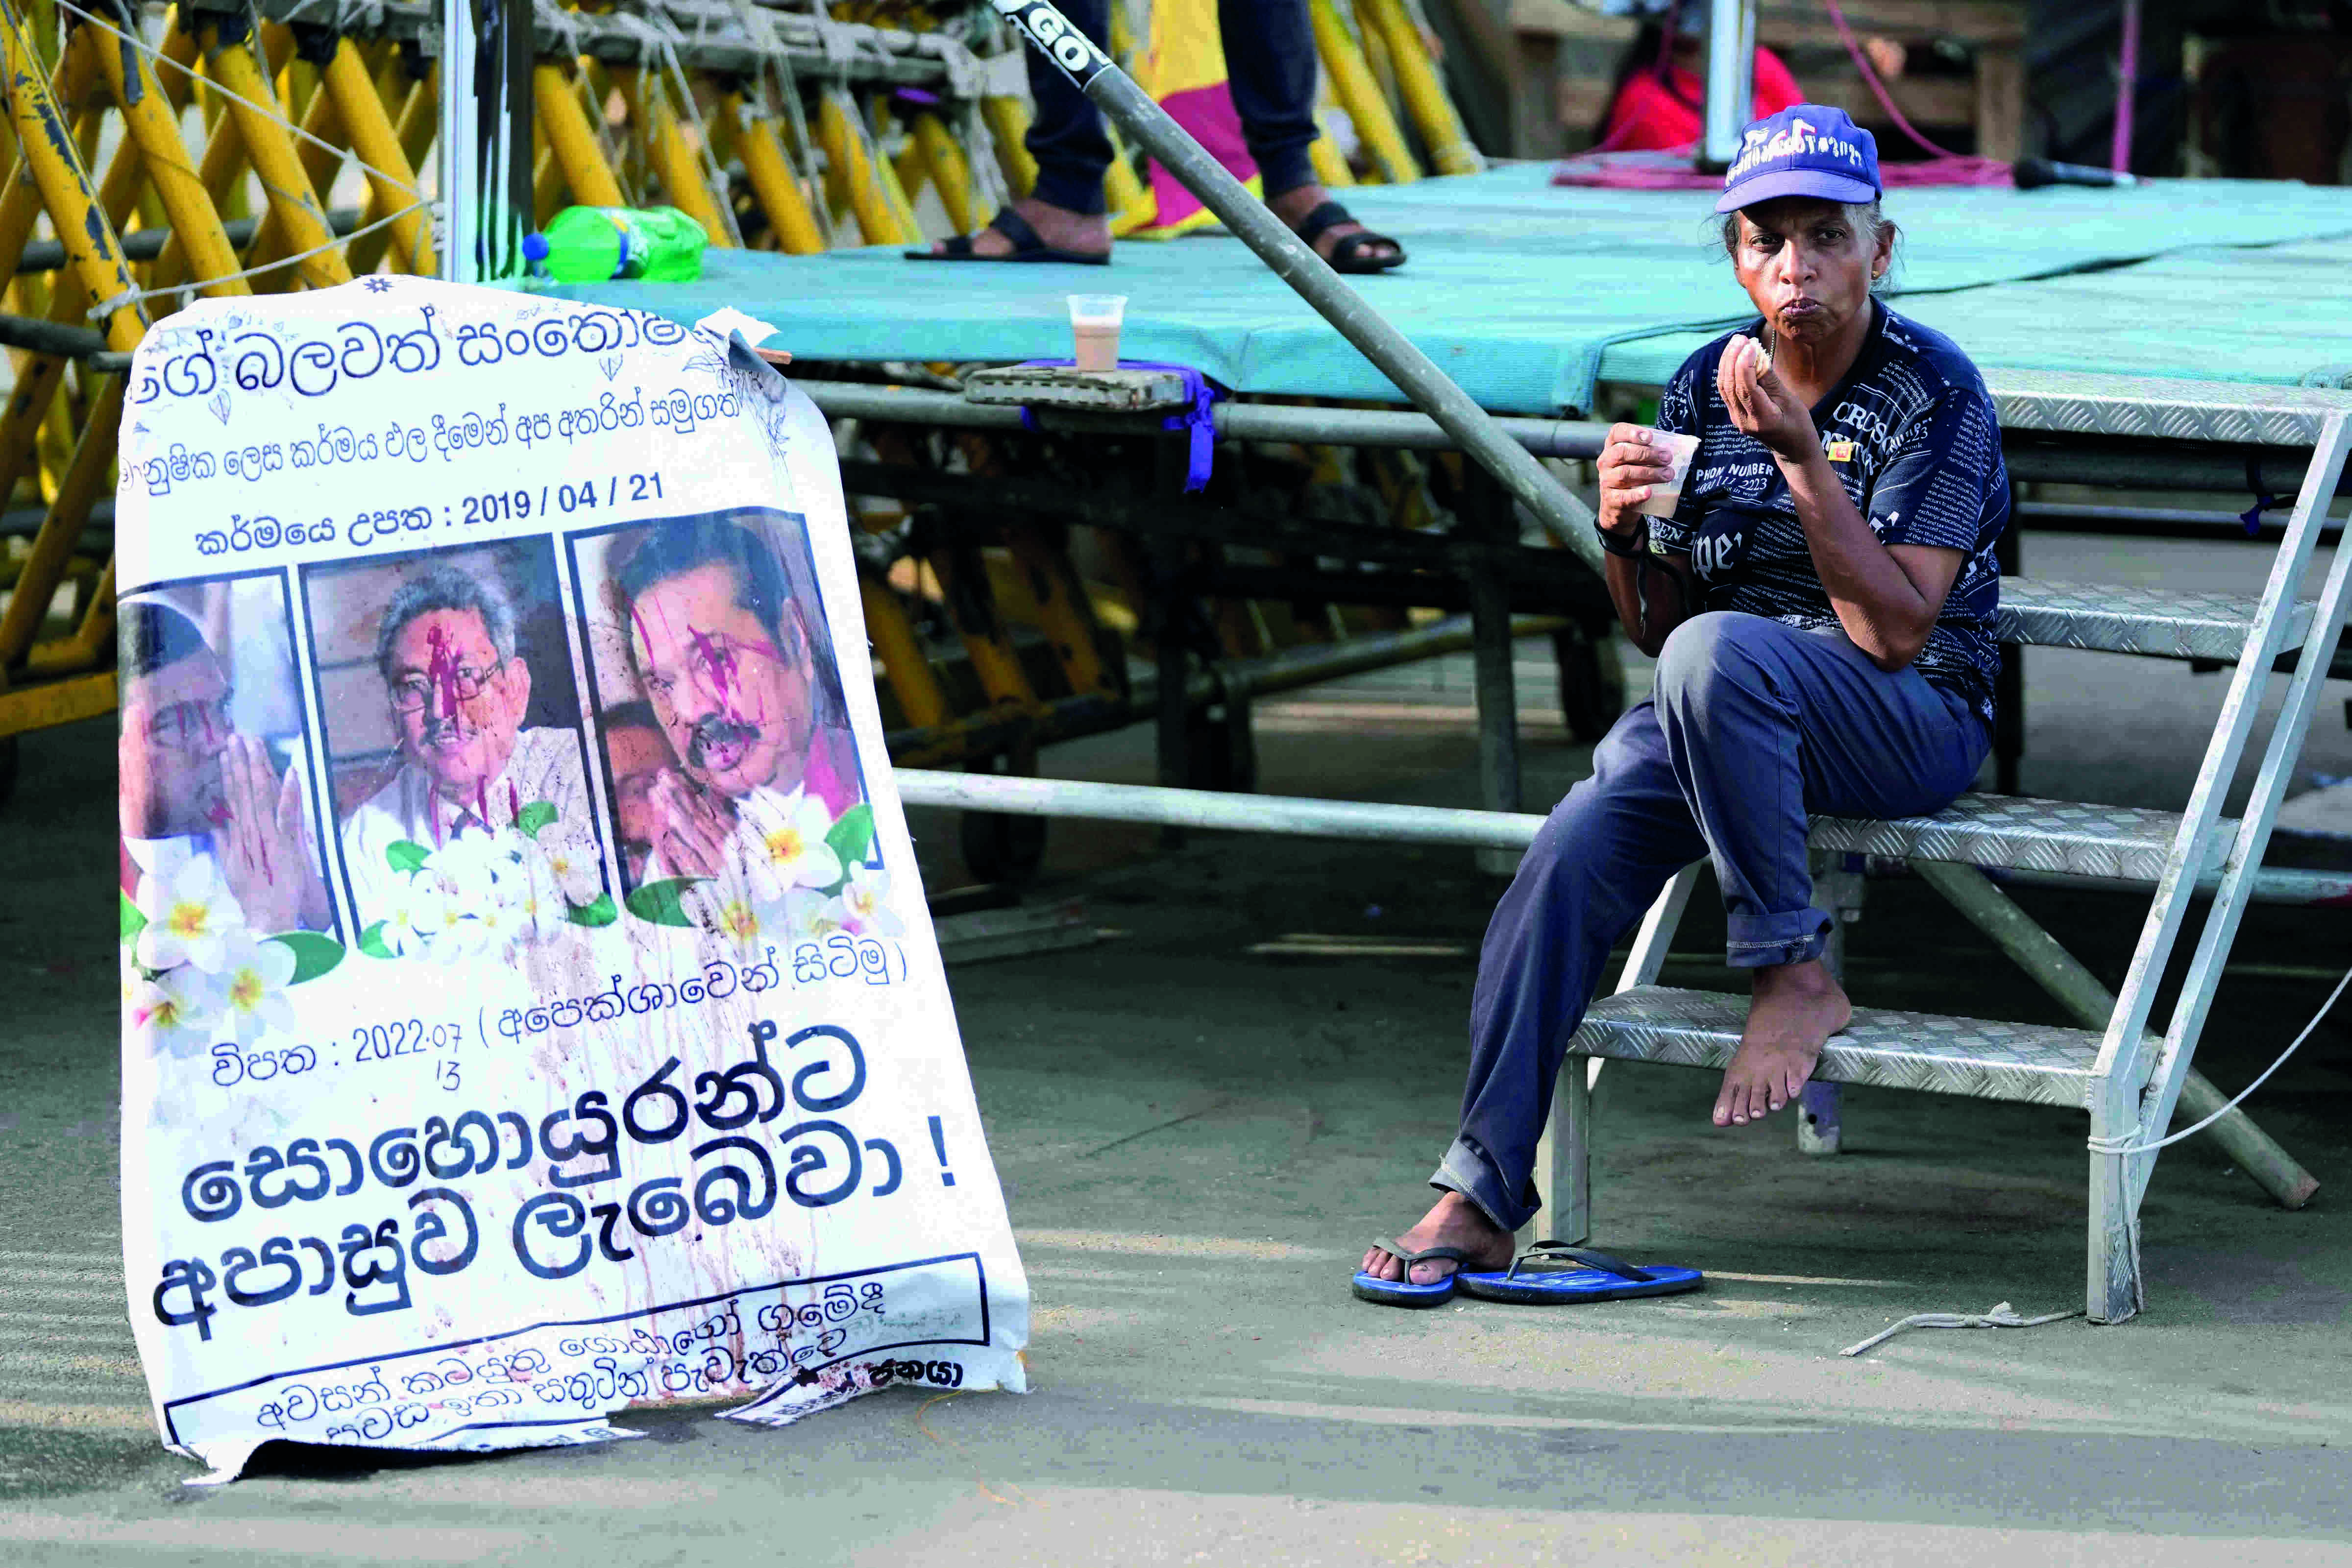 Sri Lankan protesters vow to continue their struggle